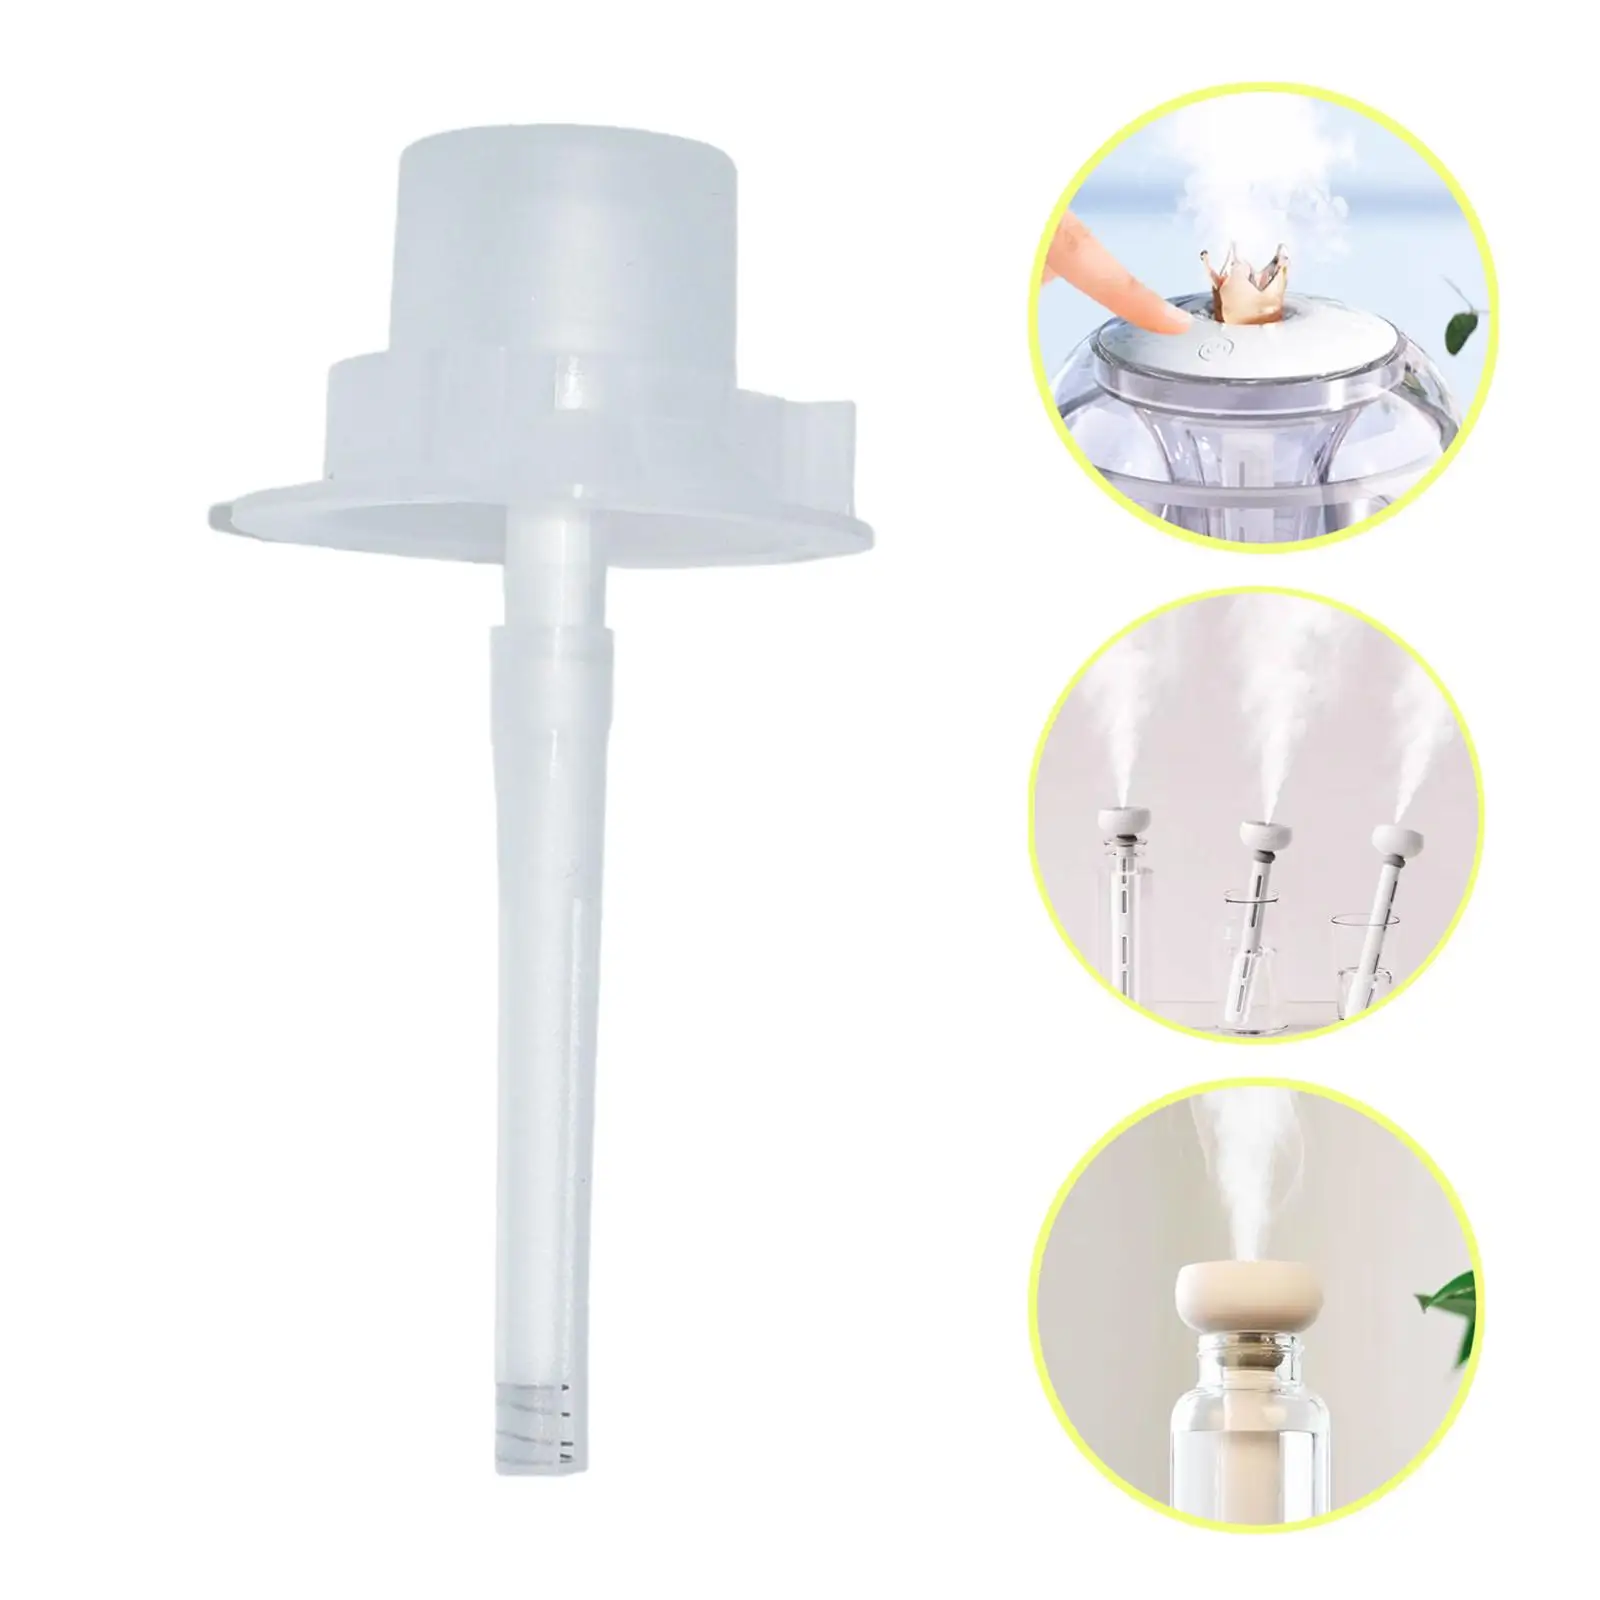 Atomization Spray Bracket Humidifier Stand Professional Humidifier Spare Parts for Office Bedroom Countertop Travel Apartments